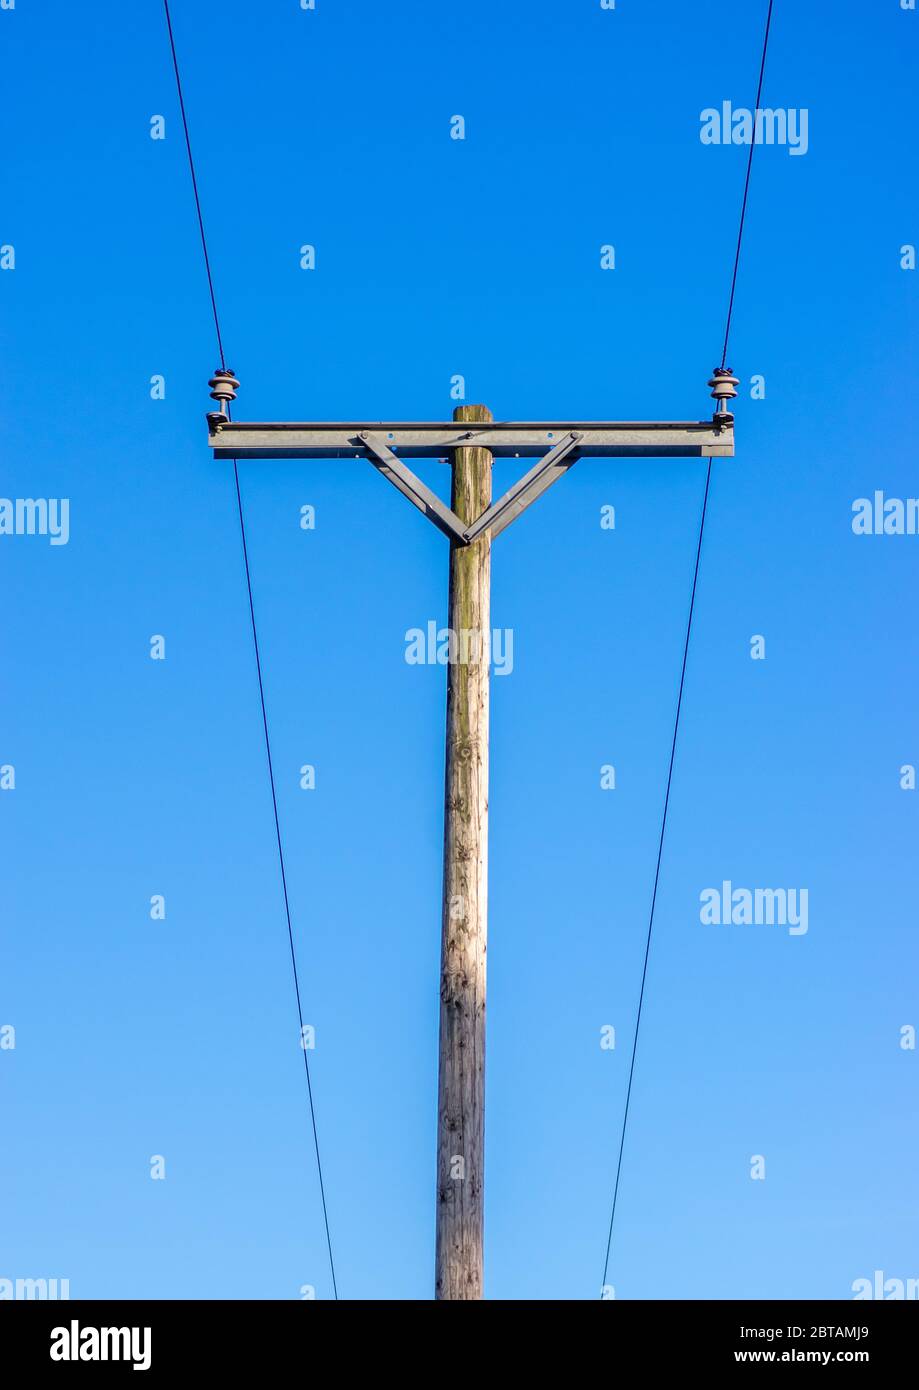 Two power lines on insulators on a wooden telegraph pole with a blue background Stock Photo